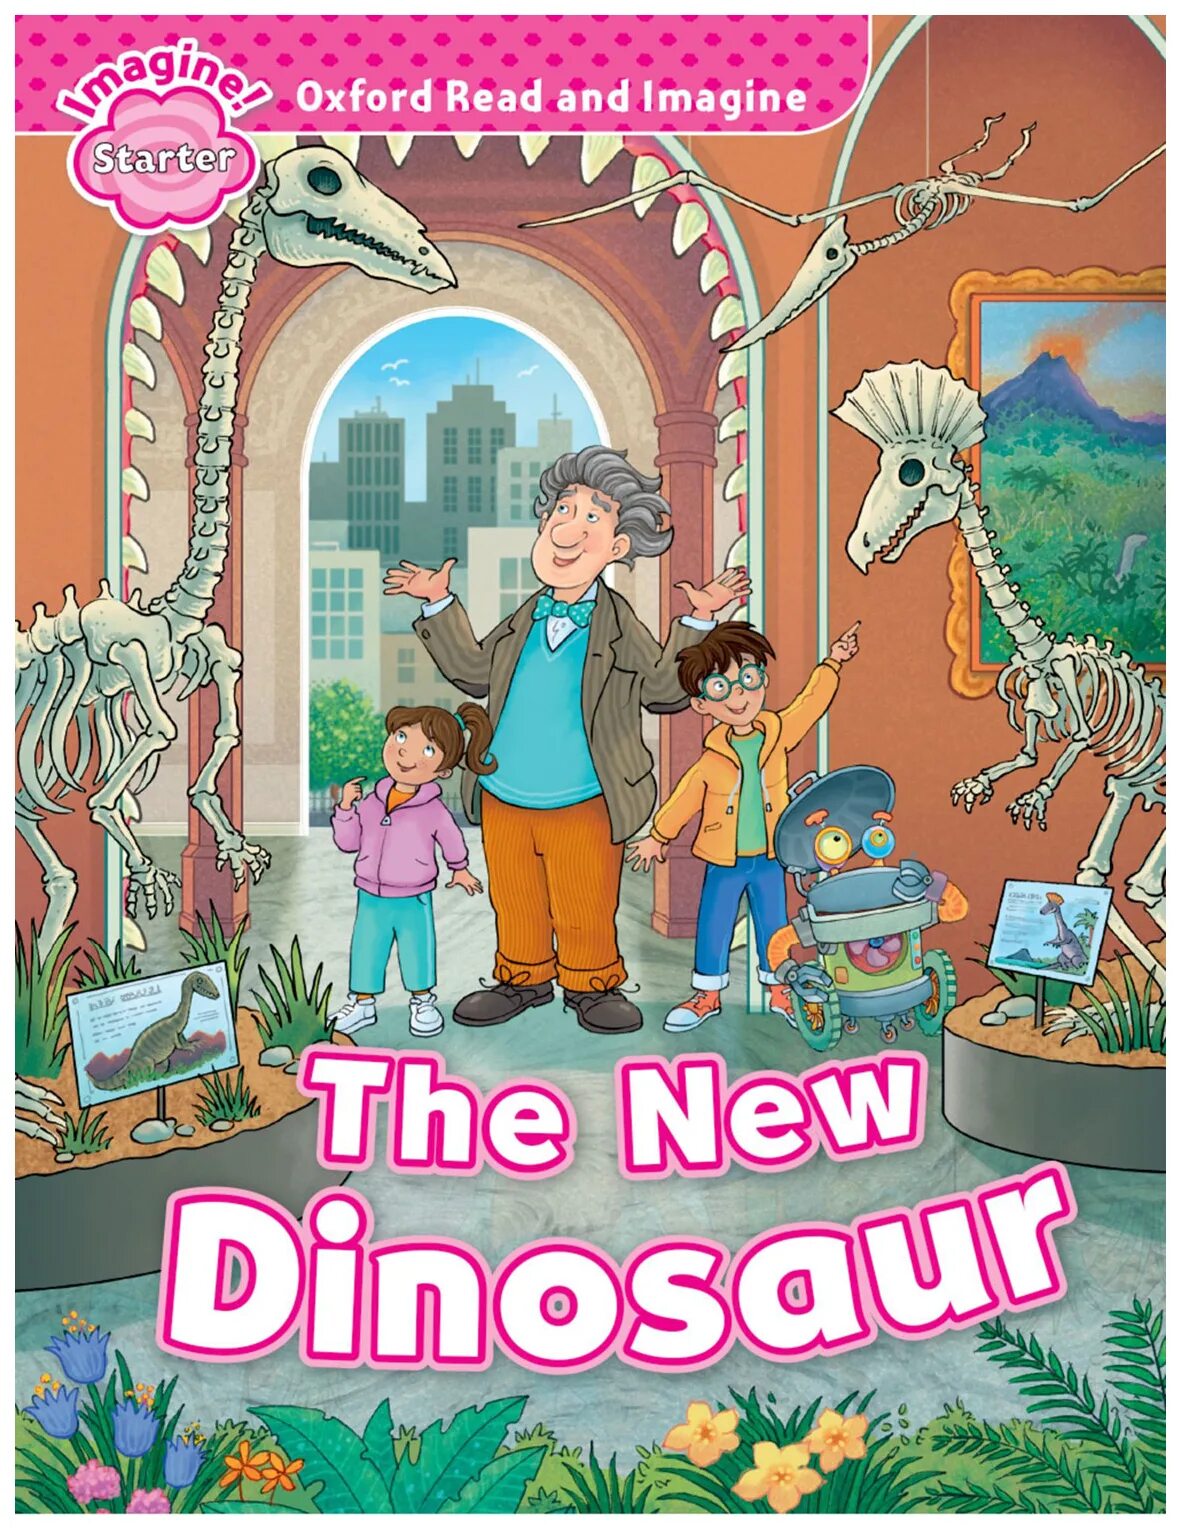 Oxford reading and imagine. Oxford read and imagine Starter купить. Oxford Graded Readers. Oxford reading Starters. The New Dinosaur Oxford read.